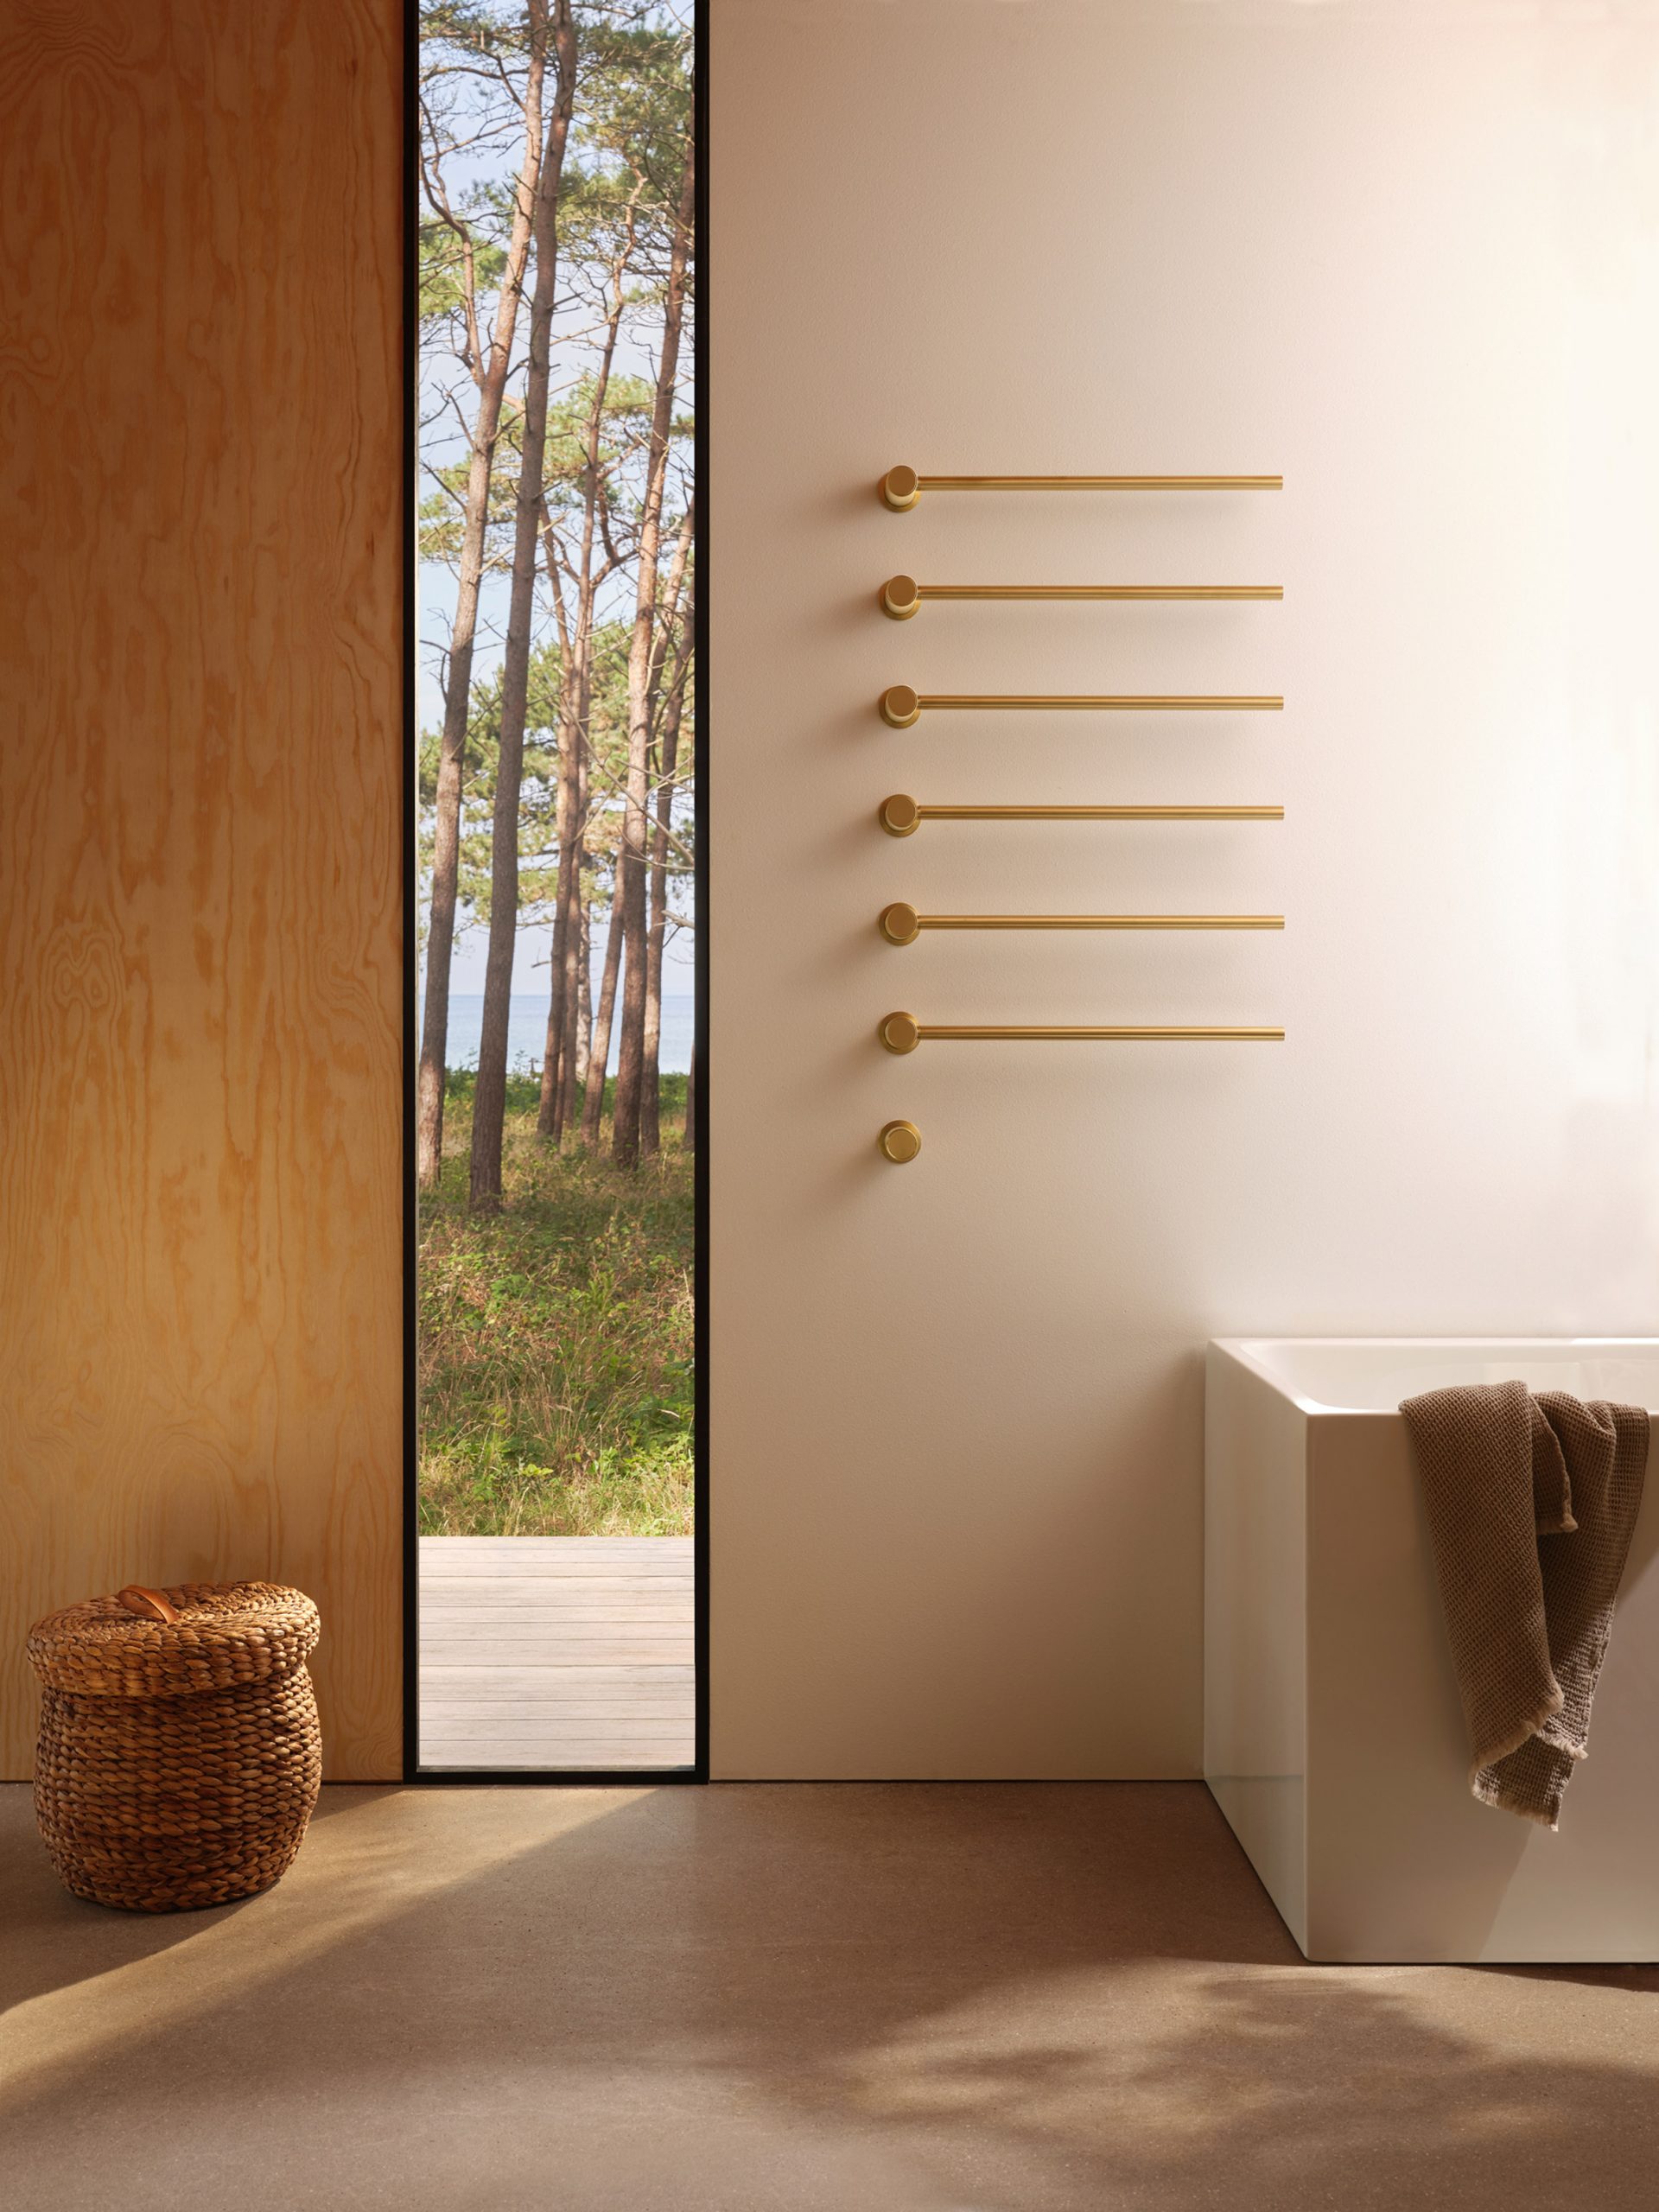 Vola's short film The Danish Sommerhus – Inspiring Life features its brushed-gold tap finish